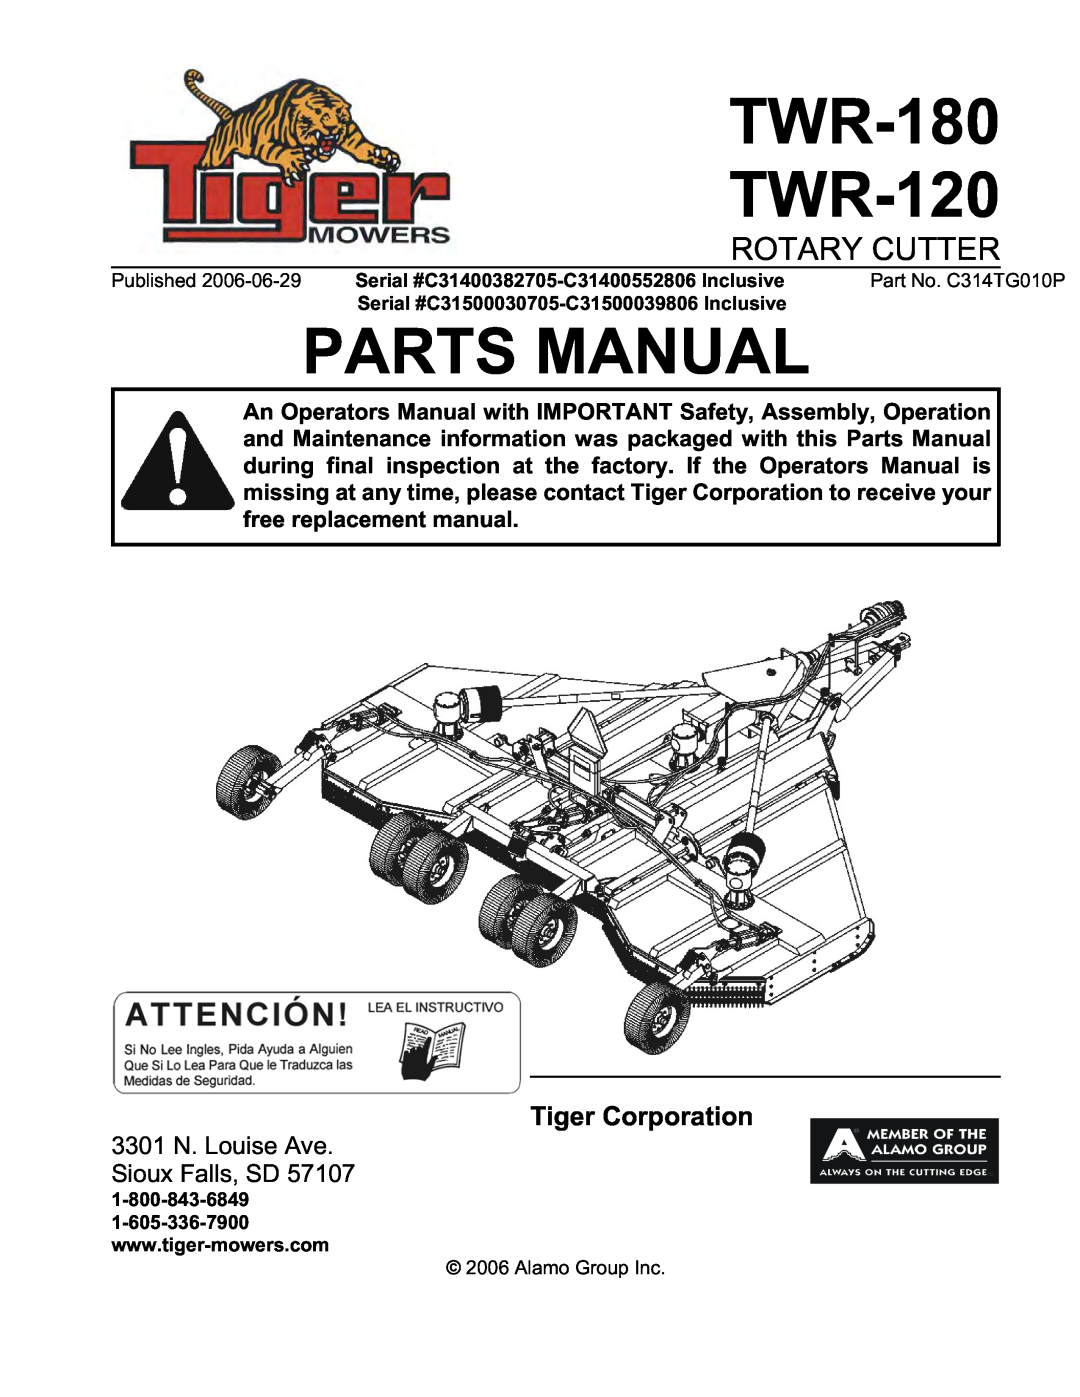 Tiger manual Tiger Corporation, 3301 N. Louise Ave Sioux Falls, SD, TWR-180 TWR-120, Parts Manual, Rotary Cutter 